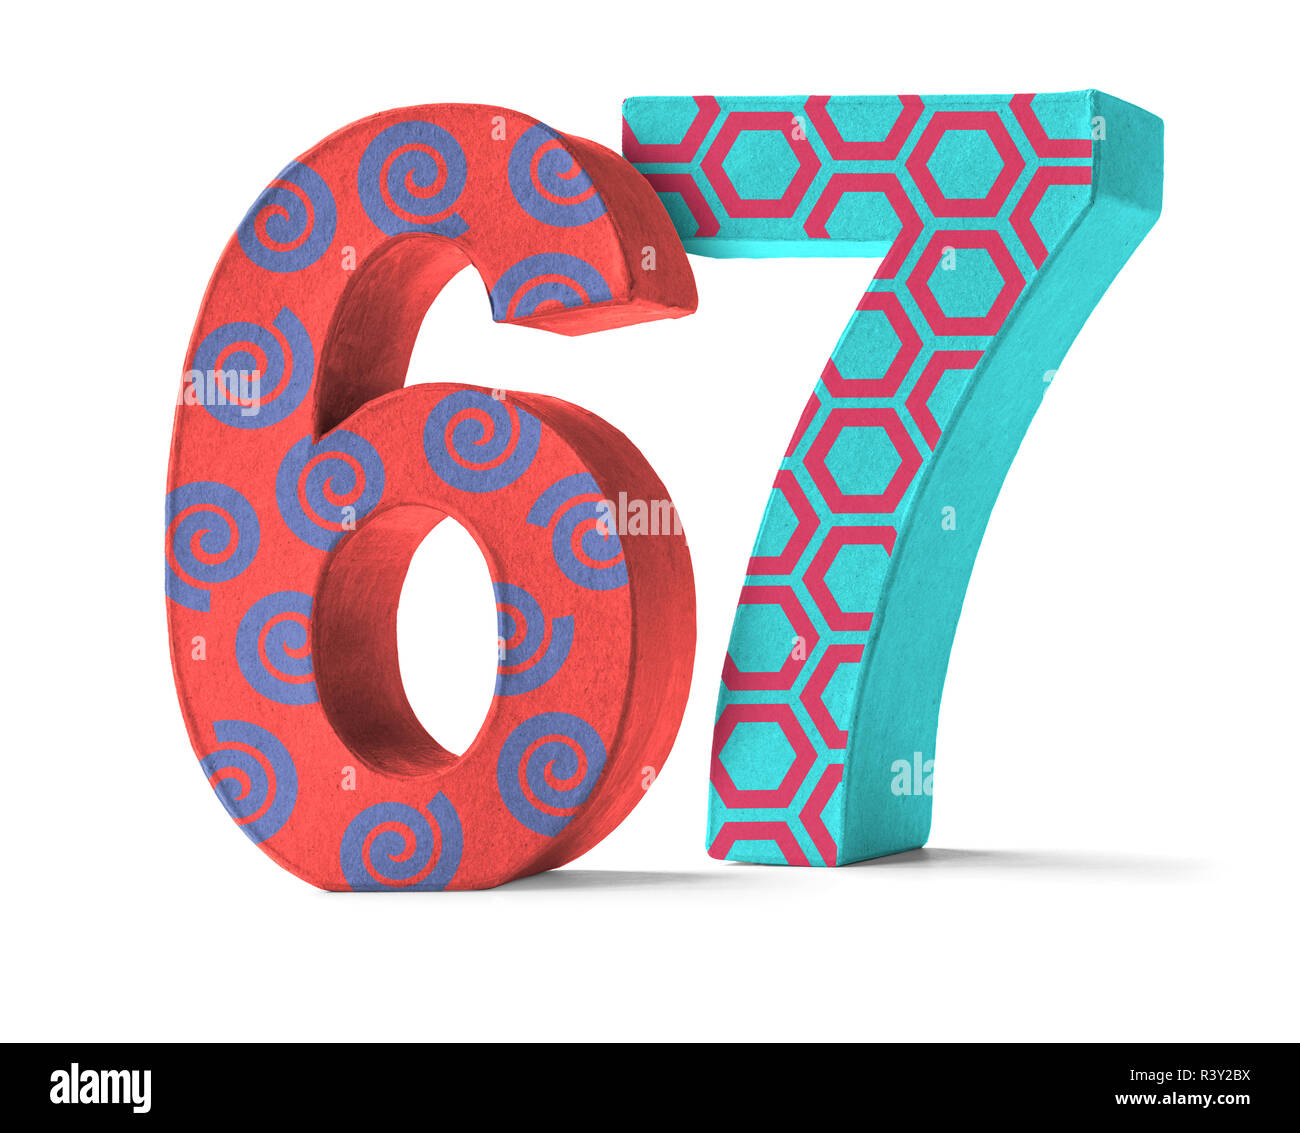 Number 67 High Resolution Stock Photography and Images - Alamy